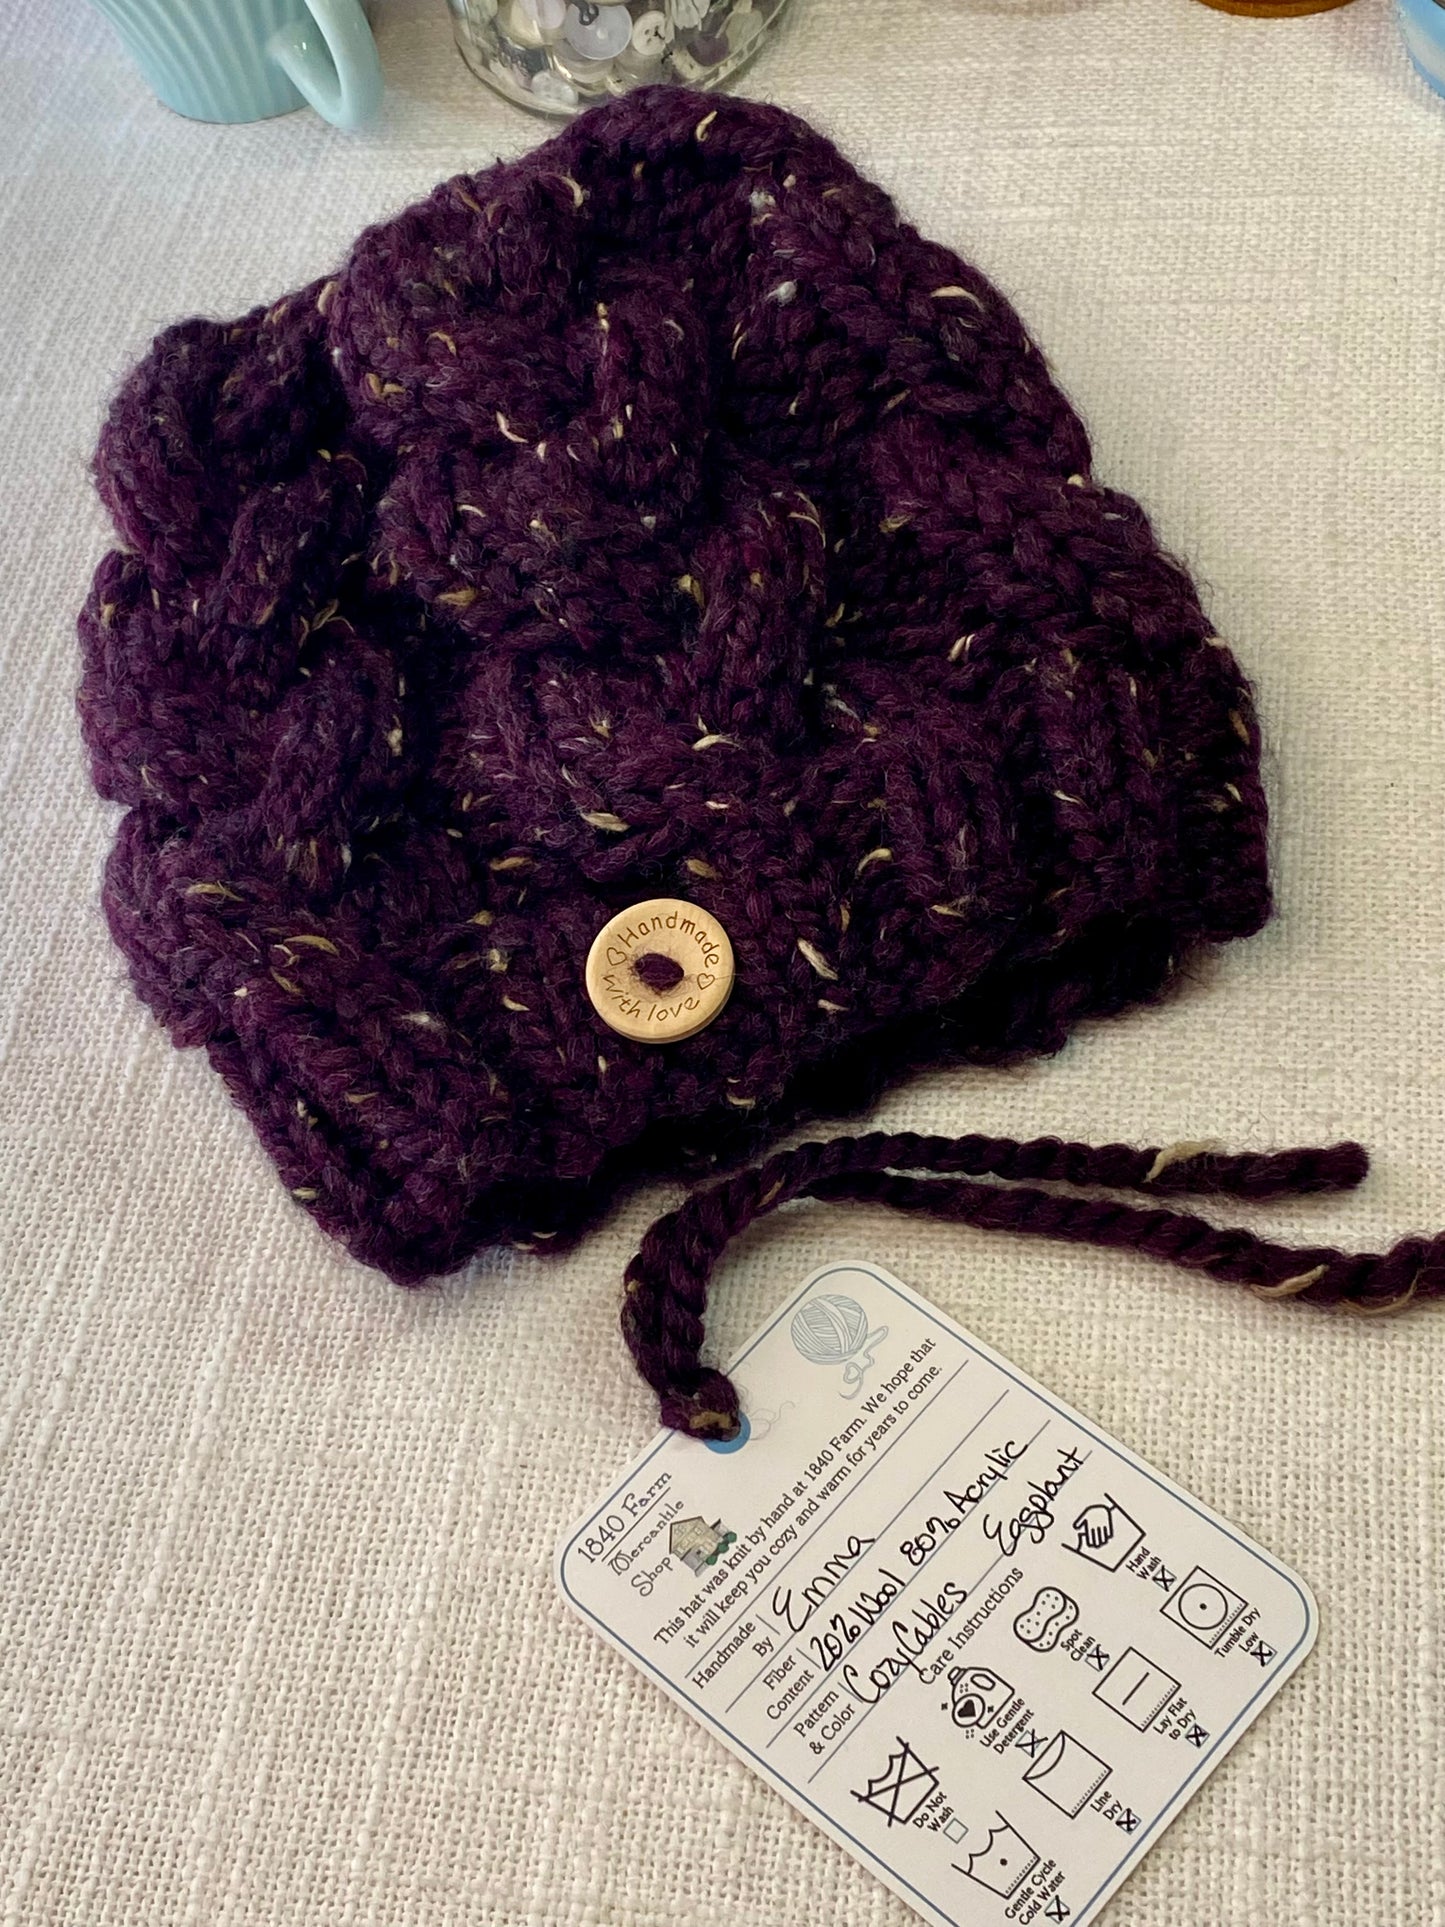 Cozy Cables Hat - Wool Blend Fiber in Eggplant